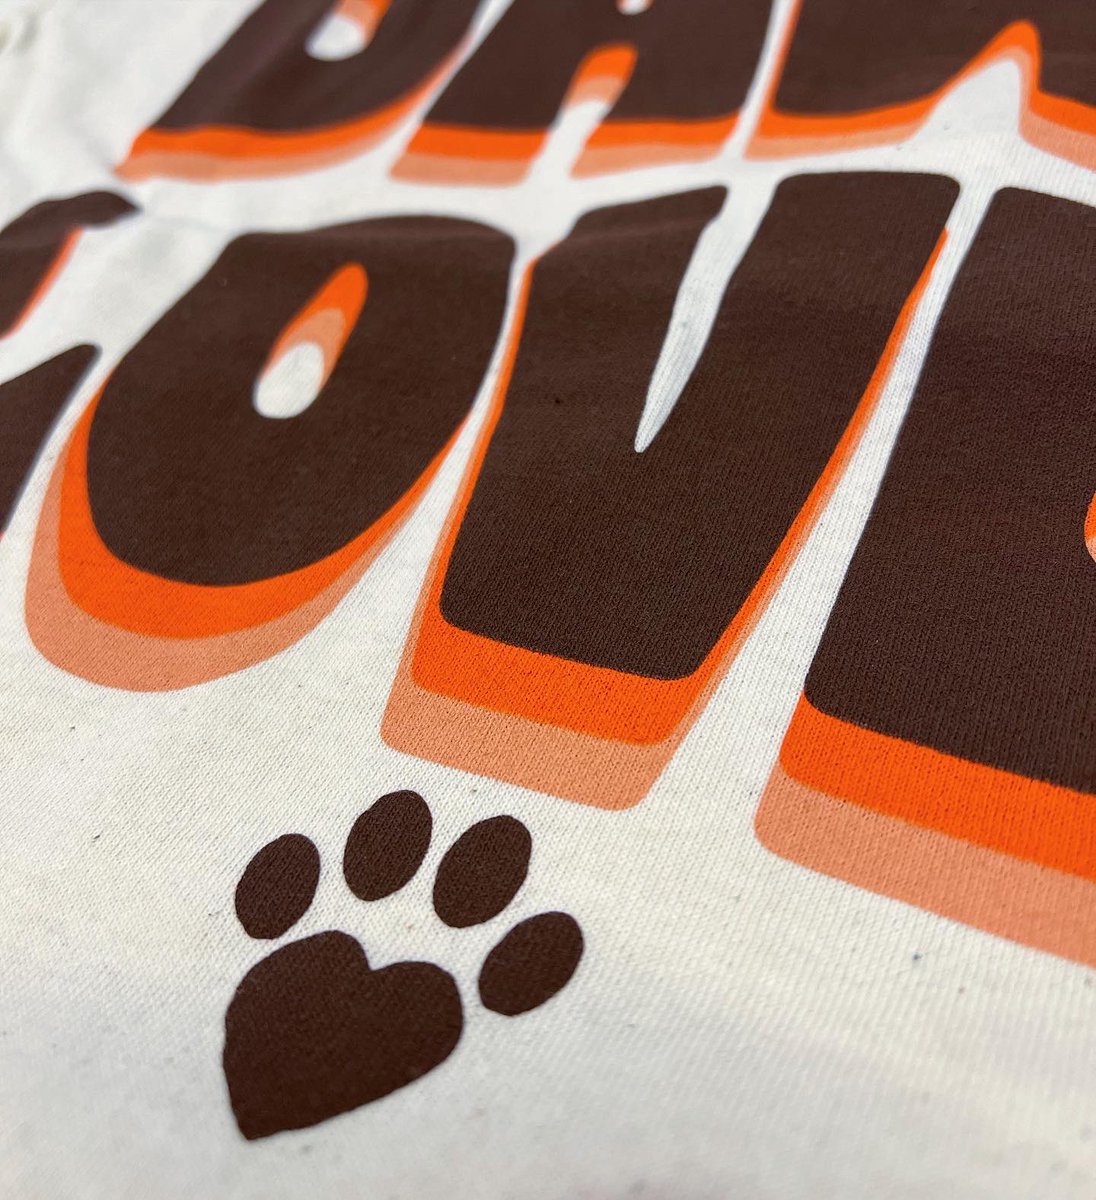 It’s Victory Monday and what’s not to love!! Good news for all our Dawg Lovers! Our popular crews and tees have just been restocked! Celebrate with 10% off our Football Collection with code VictoryMonday at checkout! And stay tuned for some more gifts up our sleeves today!